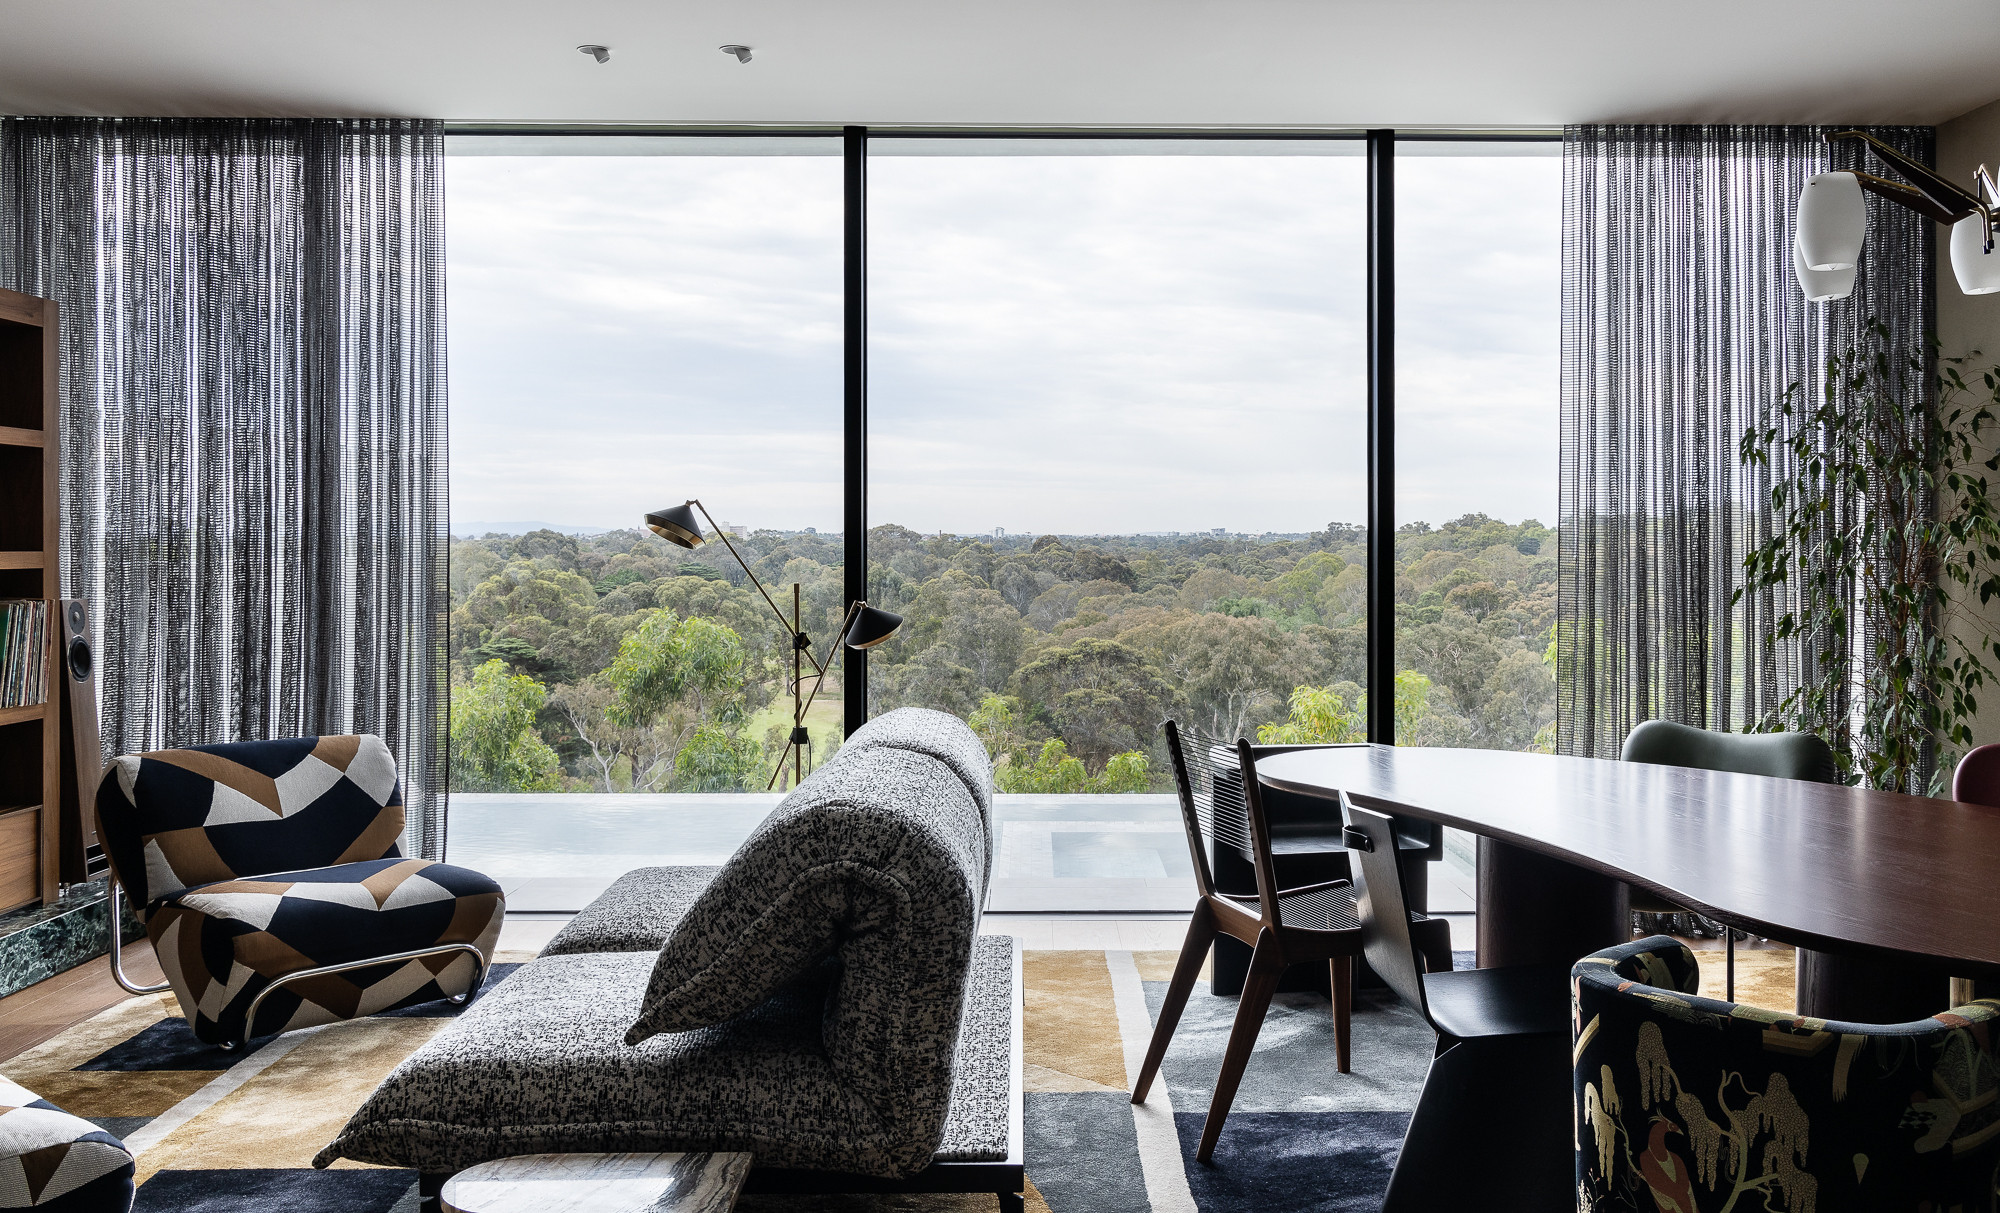 Living room area with dining table overlooking Yarra River Australia